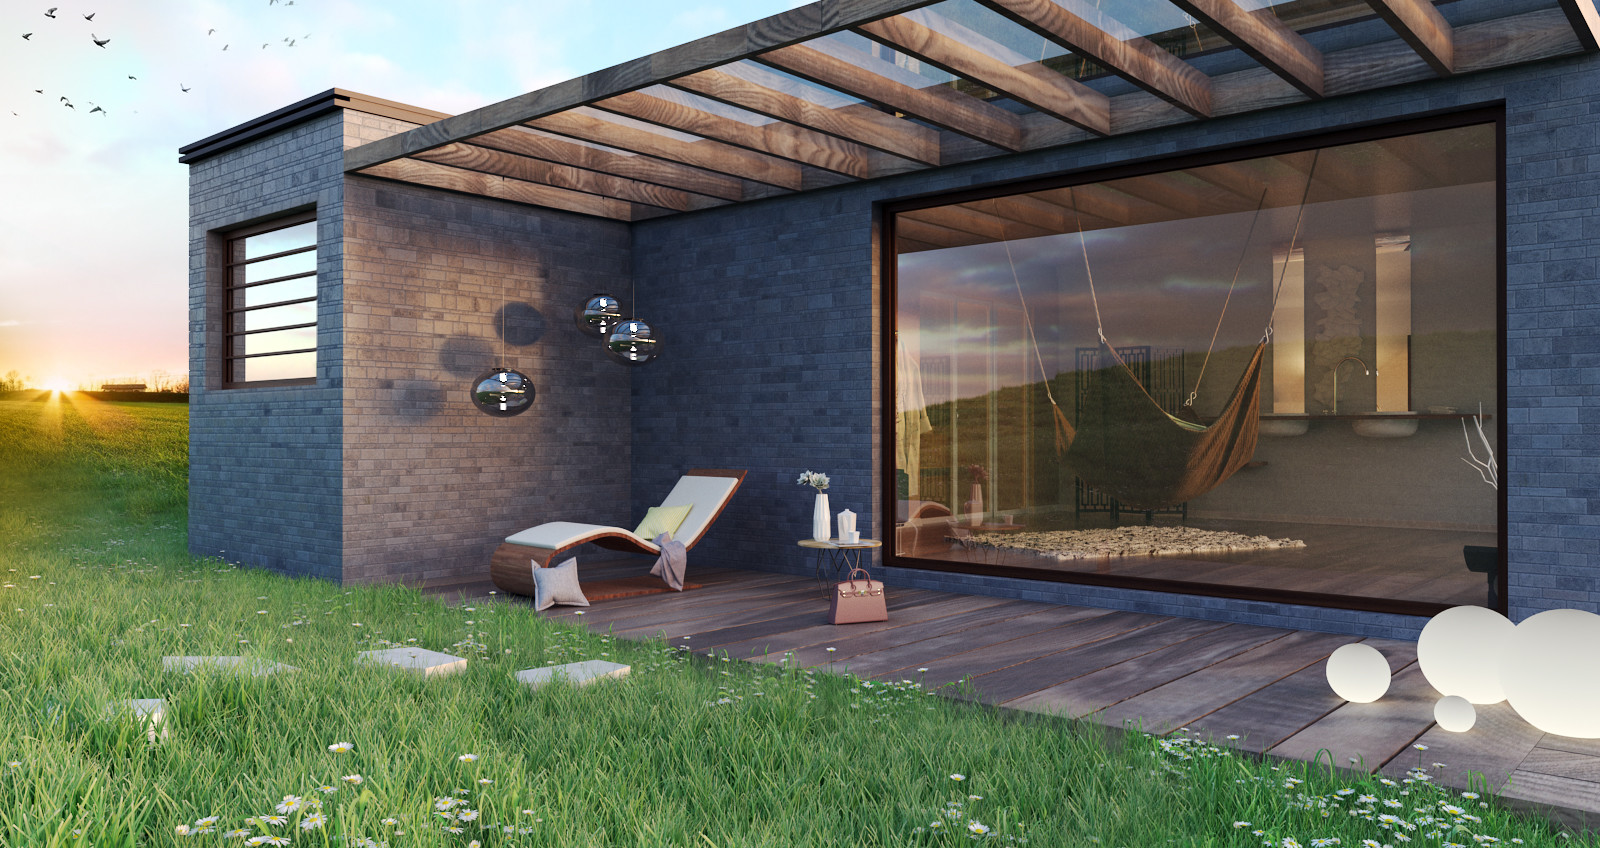 3d Base - Rendered with Vray in 3ds Max